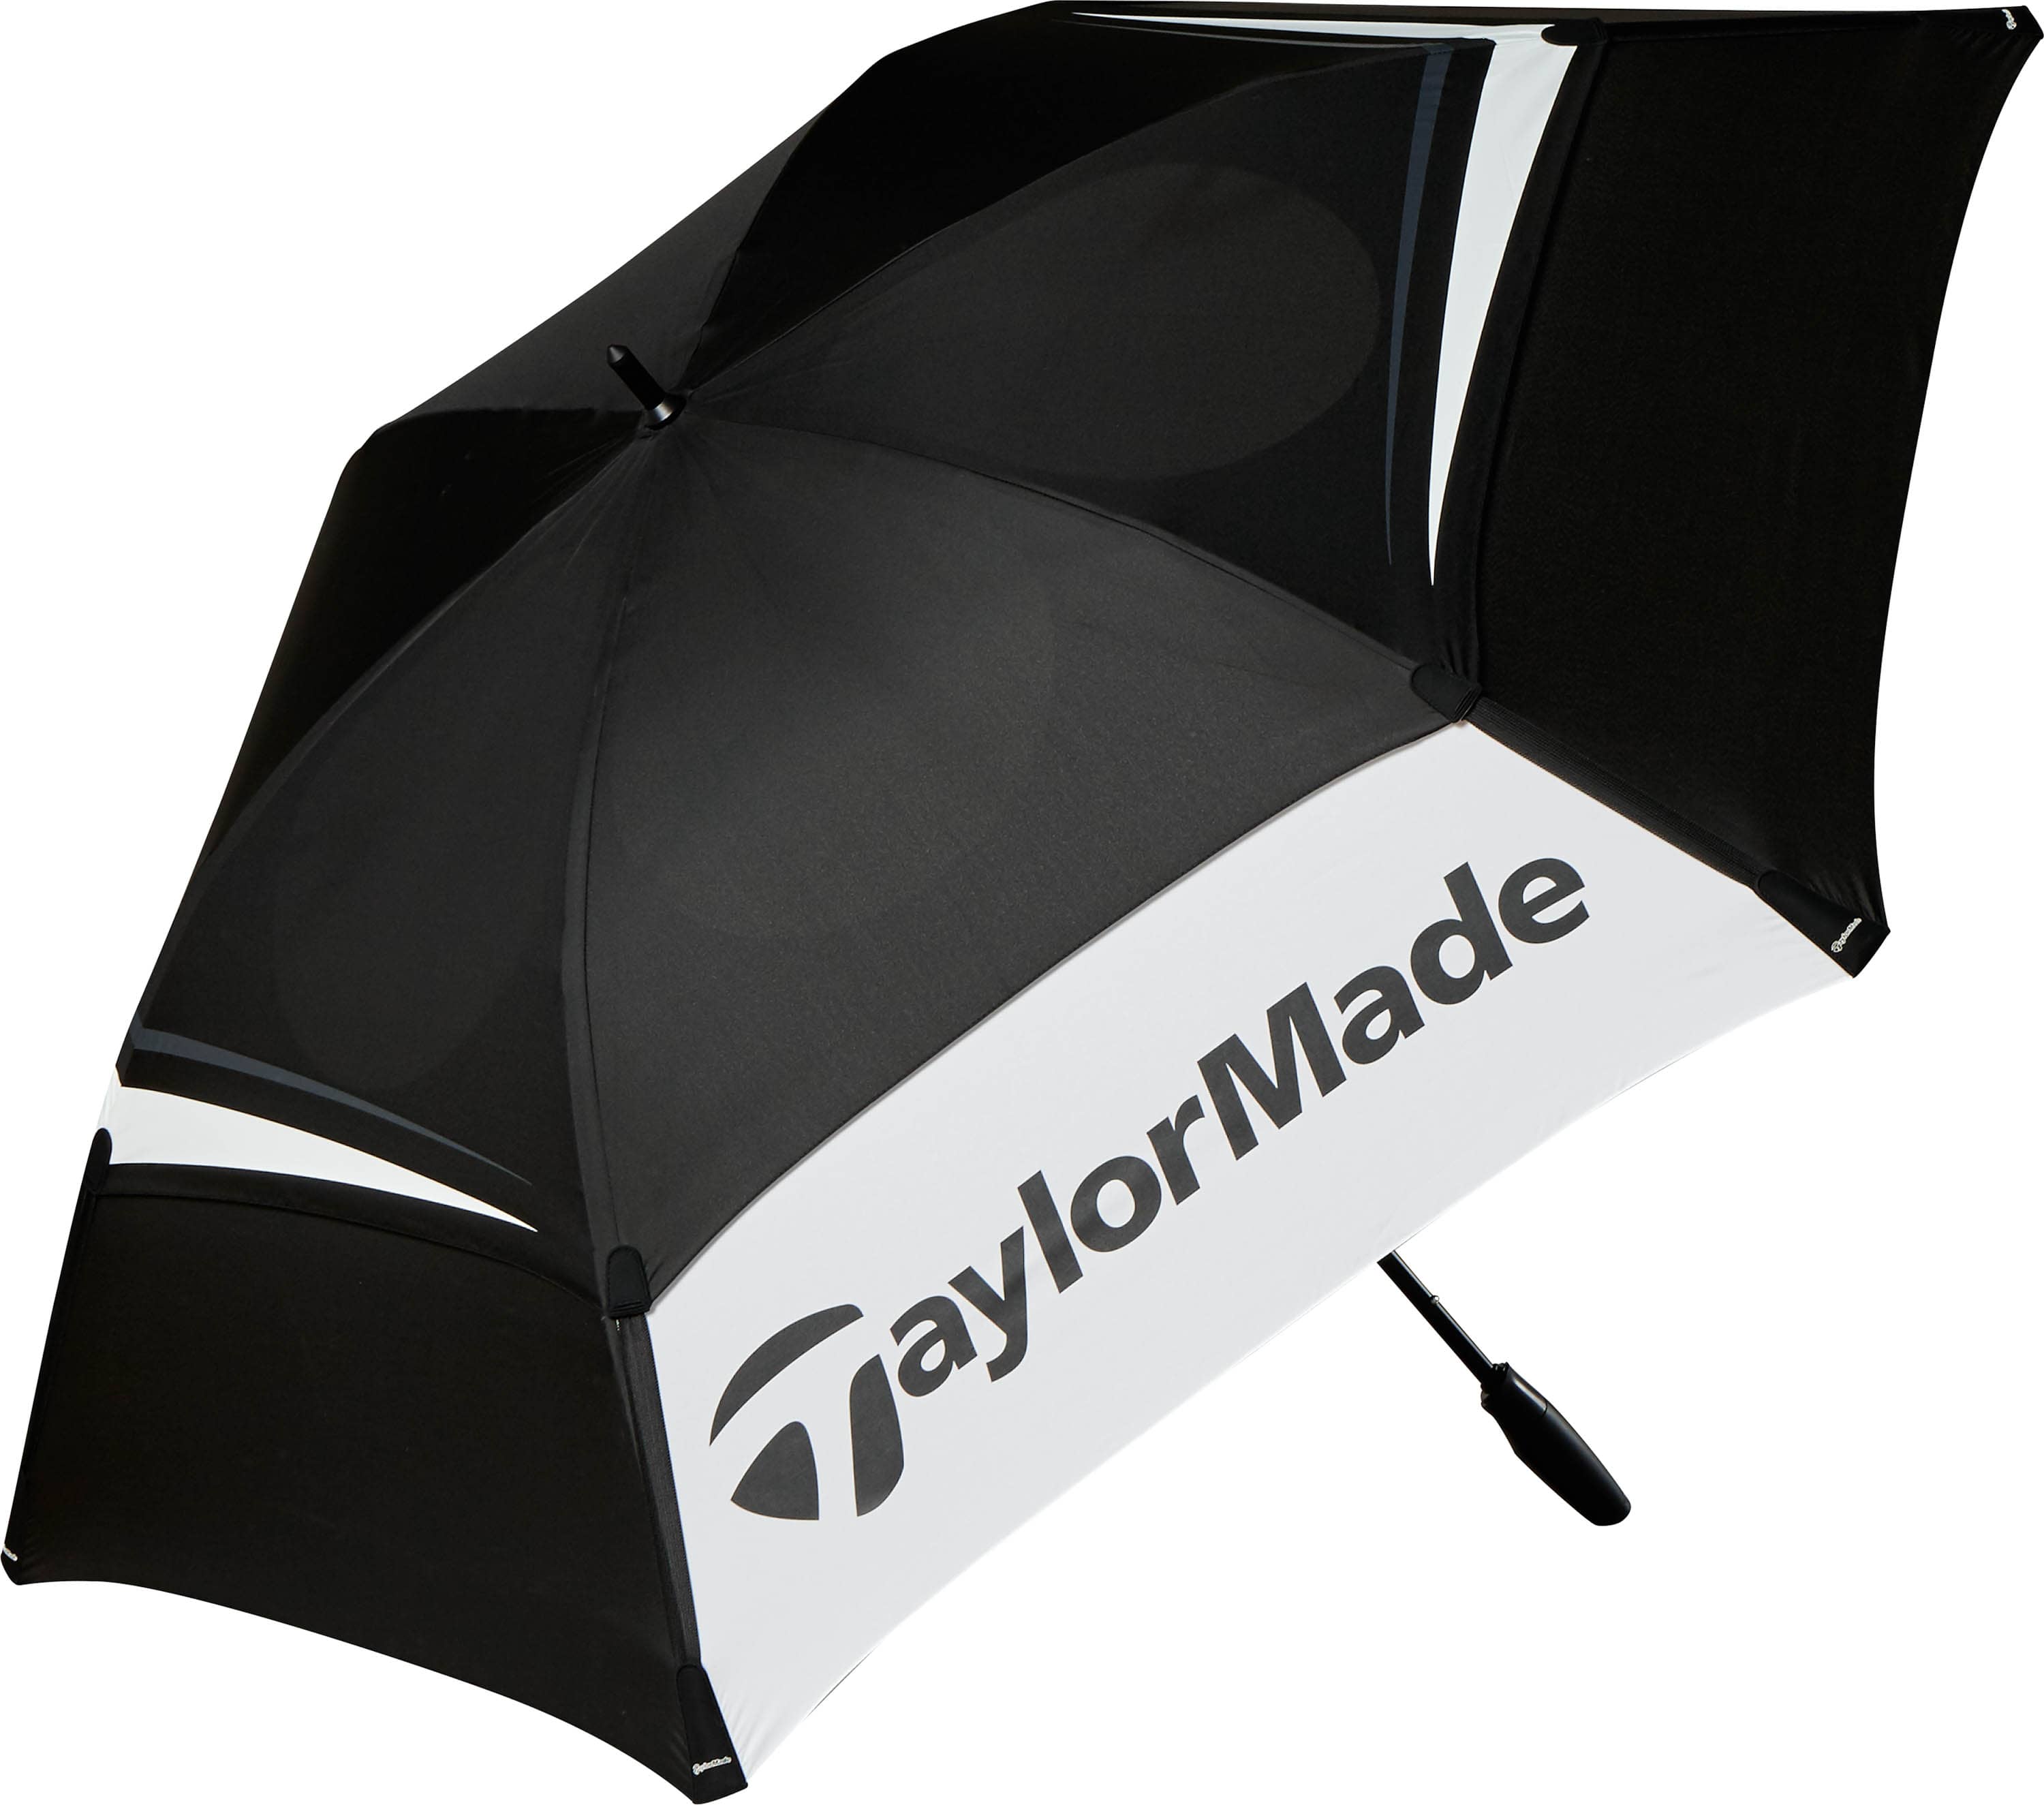 TaylorMade Tour Double Canopy Umbrella, 68 inch, black/white/grey